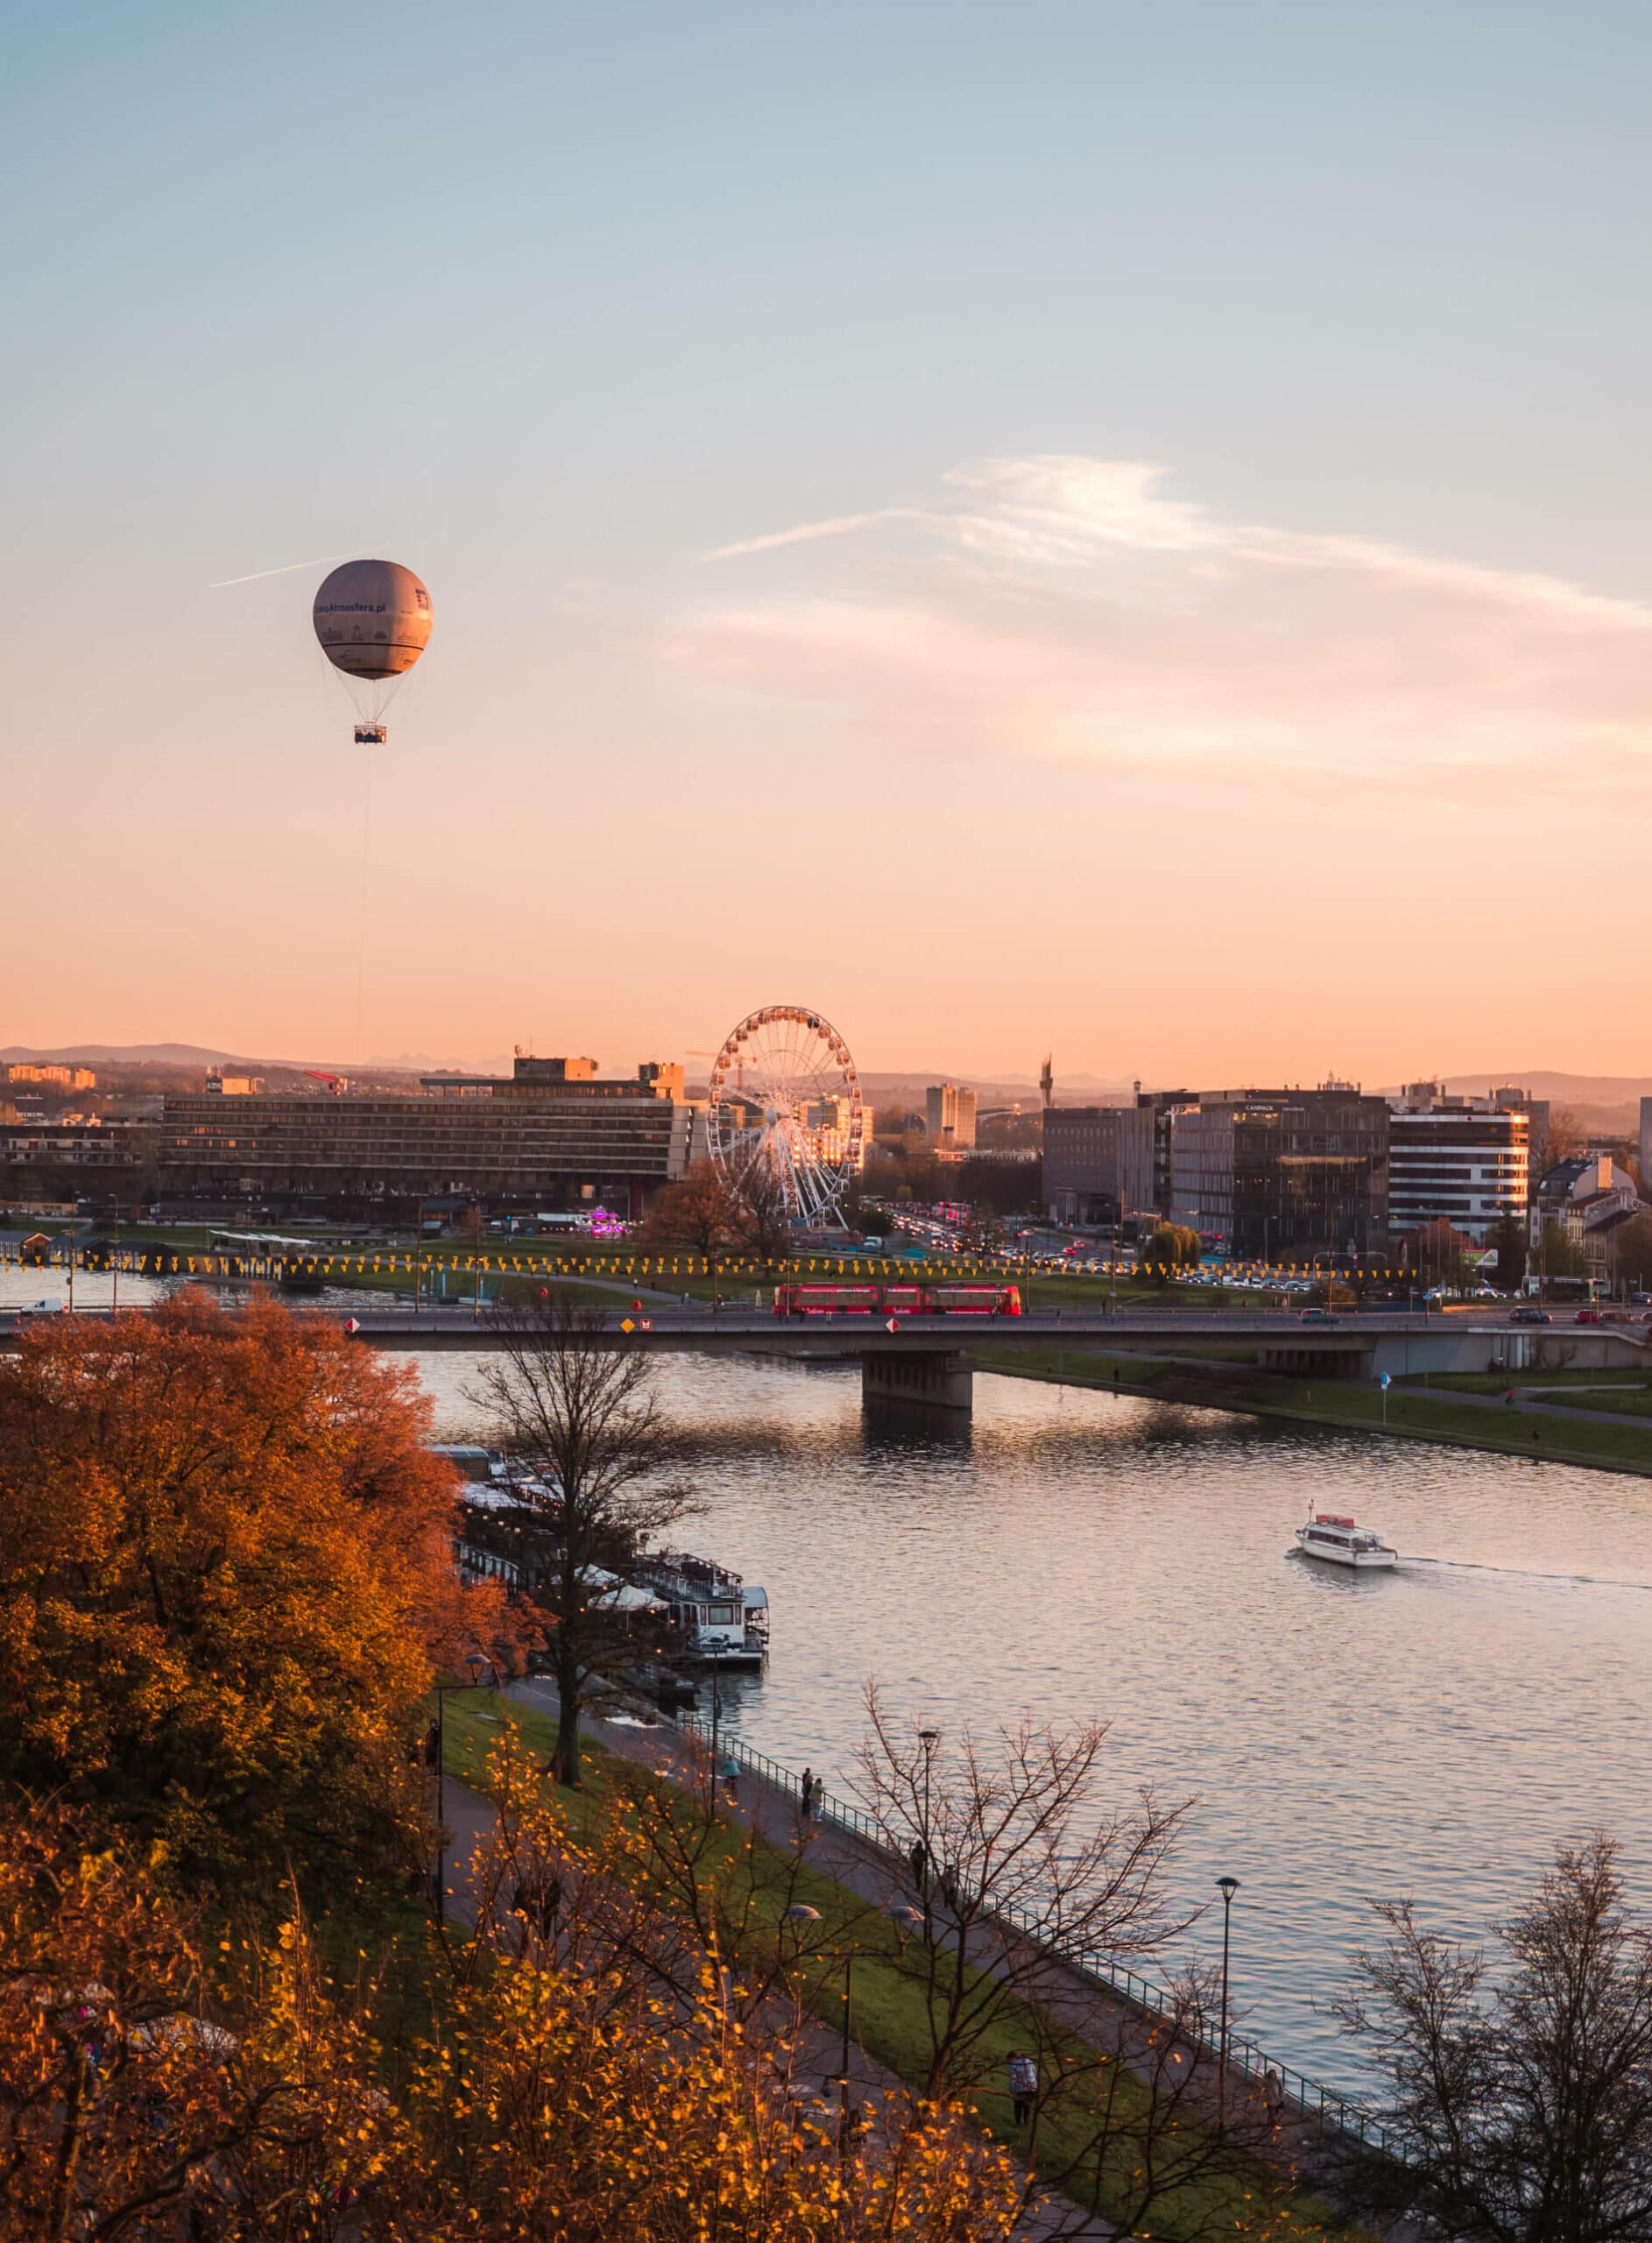 Is Poland worth visiting? View of the river in Krakow with a hot air balloon, ferris wheel and bridge from Wawel Castle at sunset during fall.